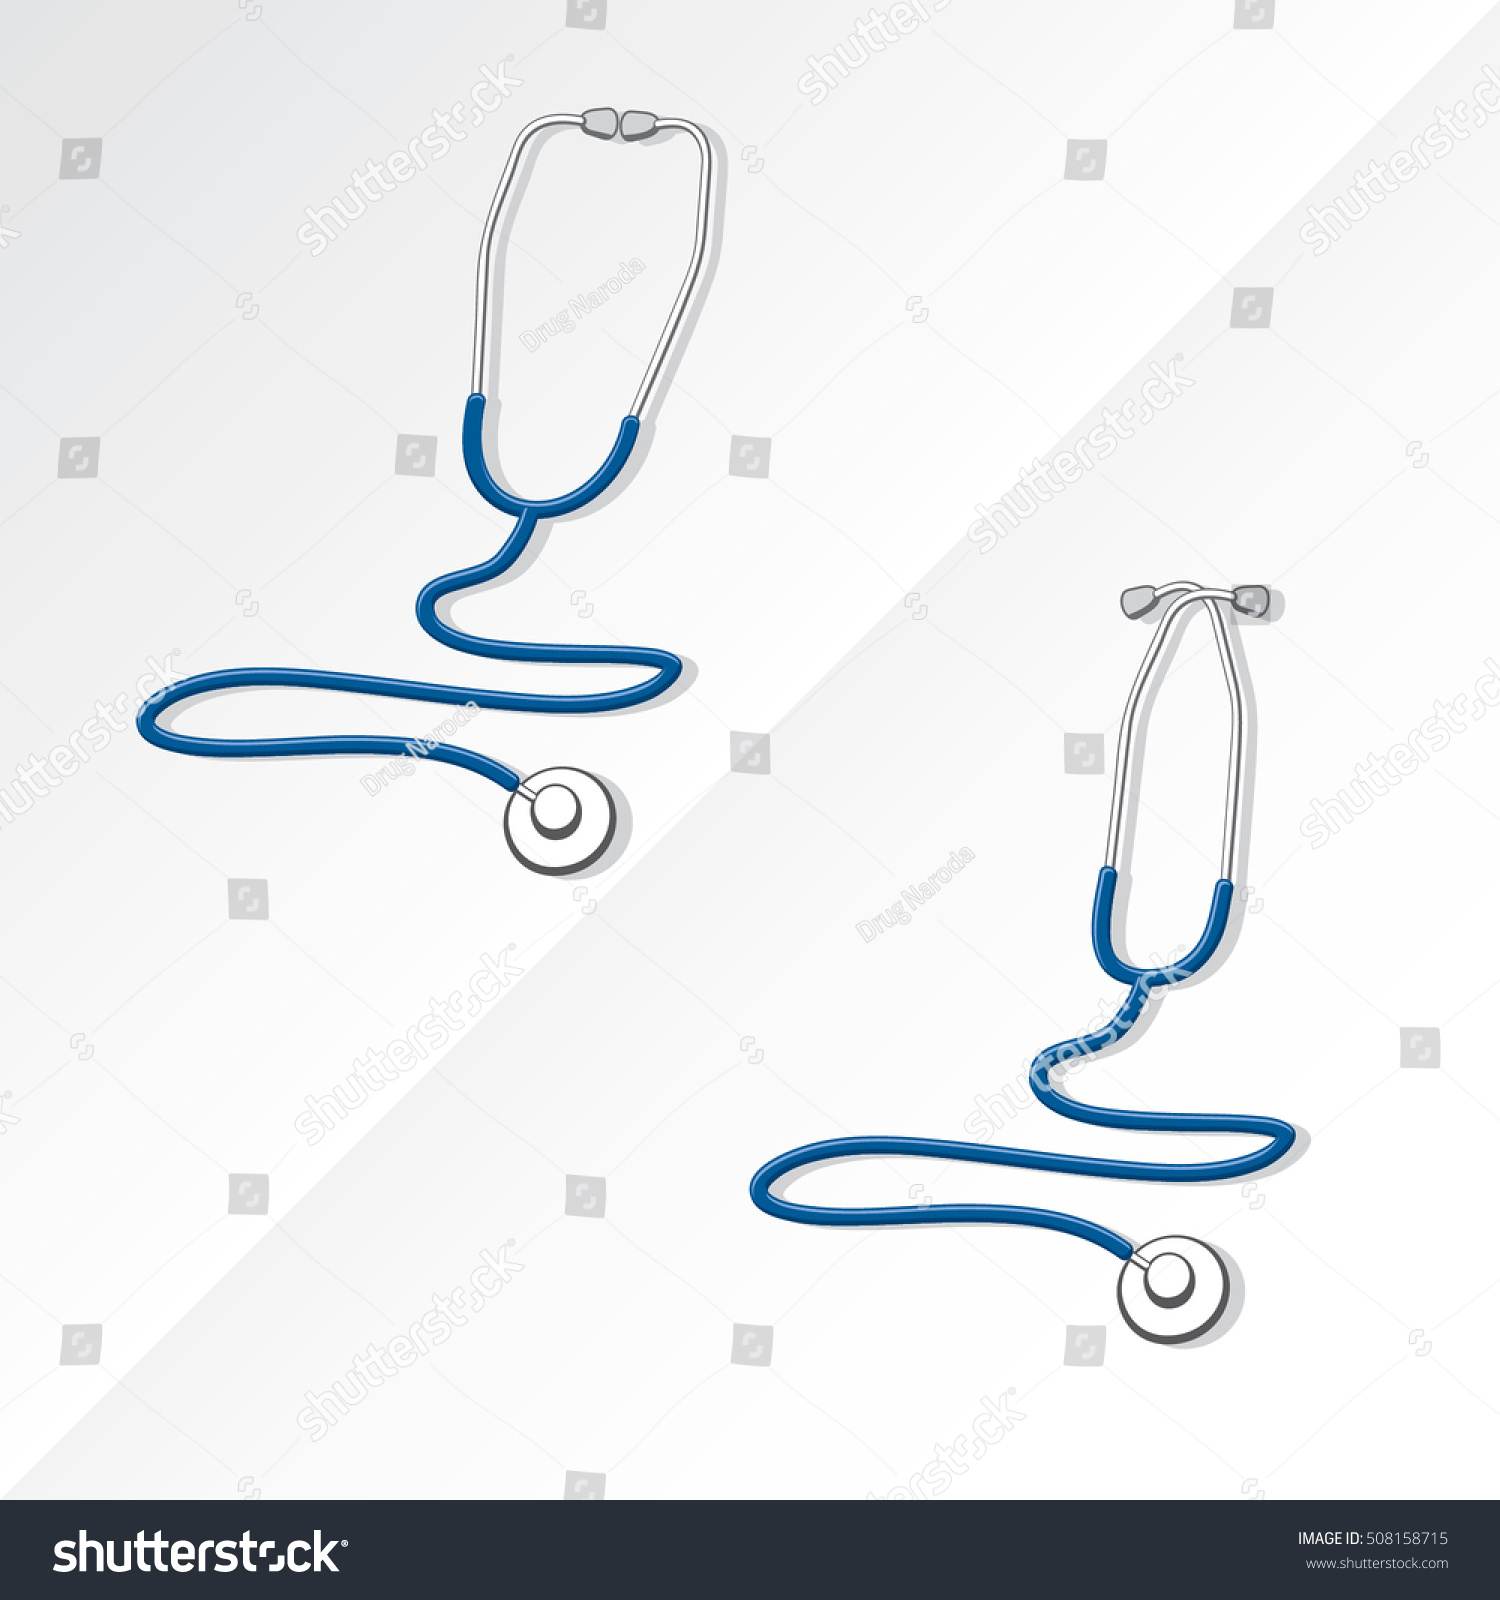 SVG of Two Medical Stethoscopes with Zigzag Shape Tubing Icons Set One with Crossed Binaural Another with Eartips Put Together - Blue and Grayscale Objects on White Background - Realistic Flat Design svg